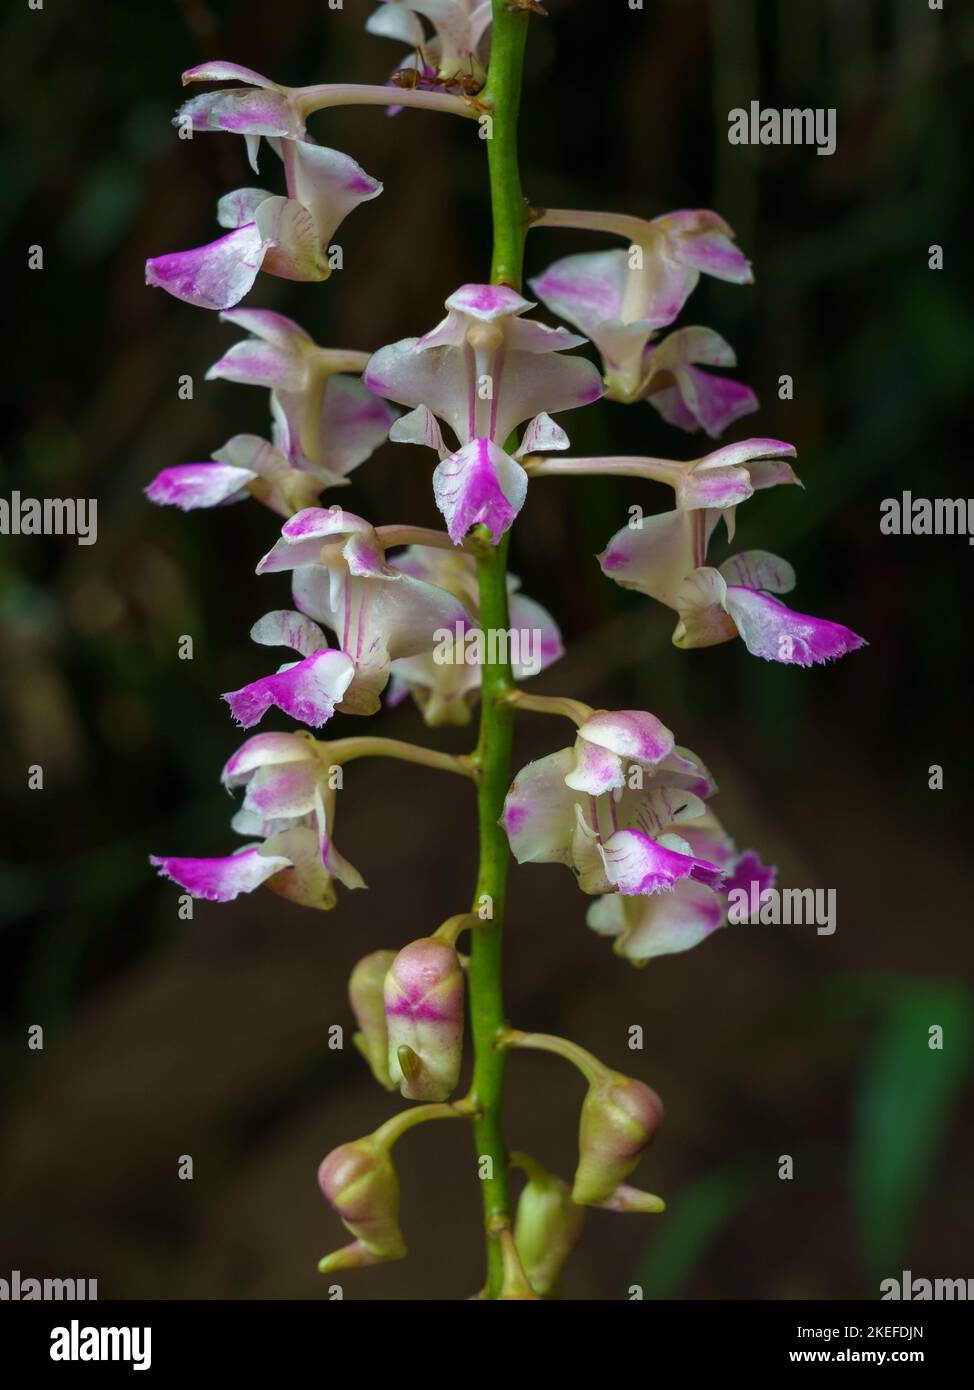 Closeup view of colorful white and purple pink flowers and buds of tropical epiphytic orchid species aerides falcata blooming on natural background Stock Photo